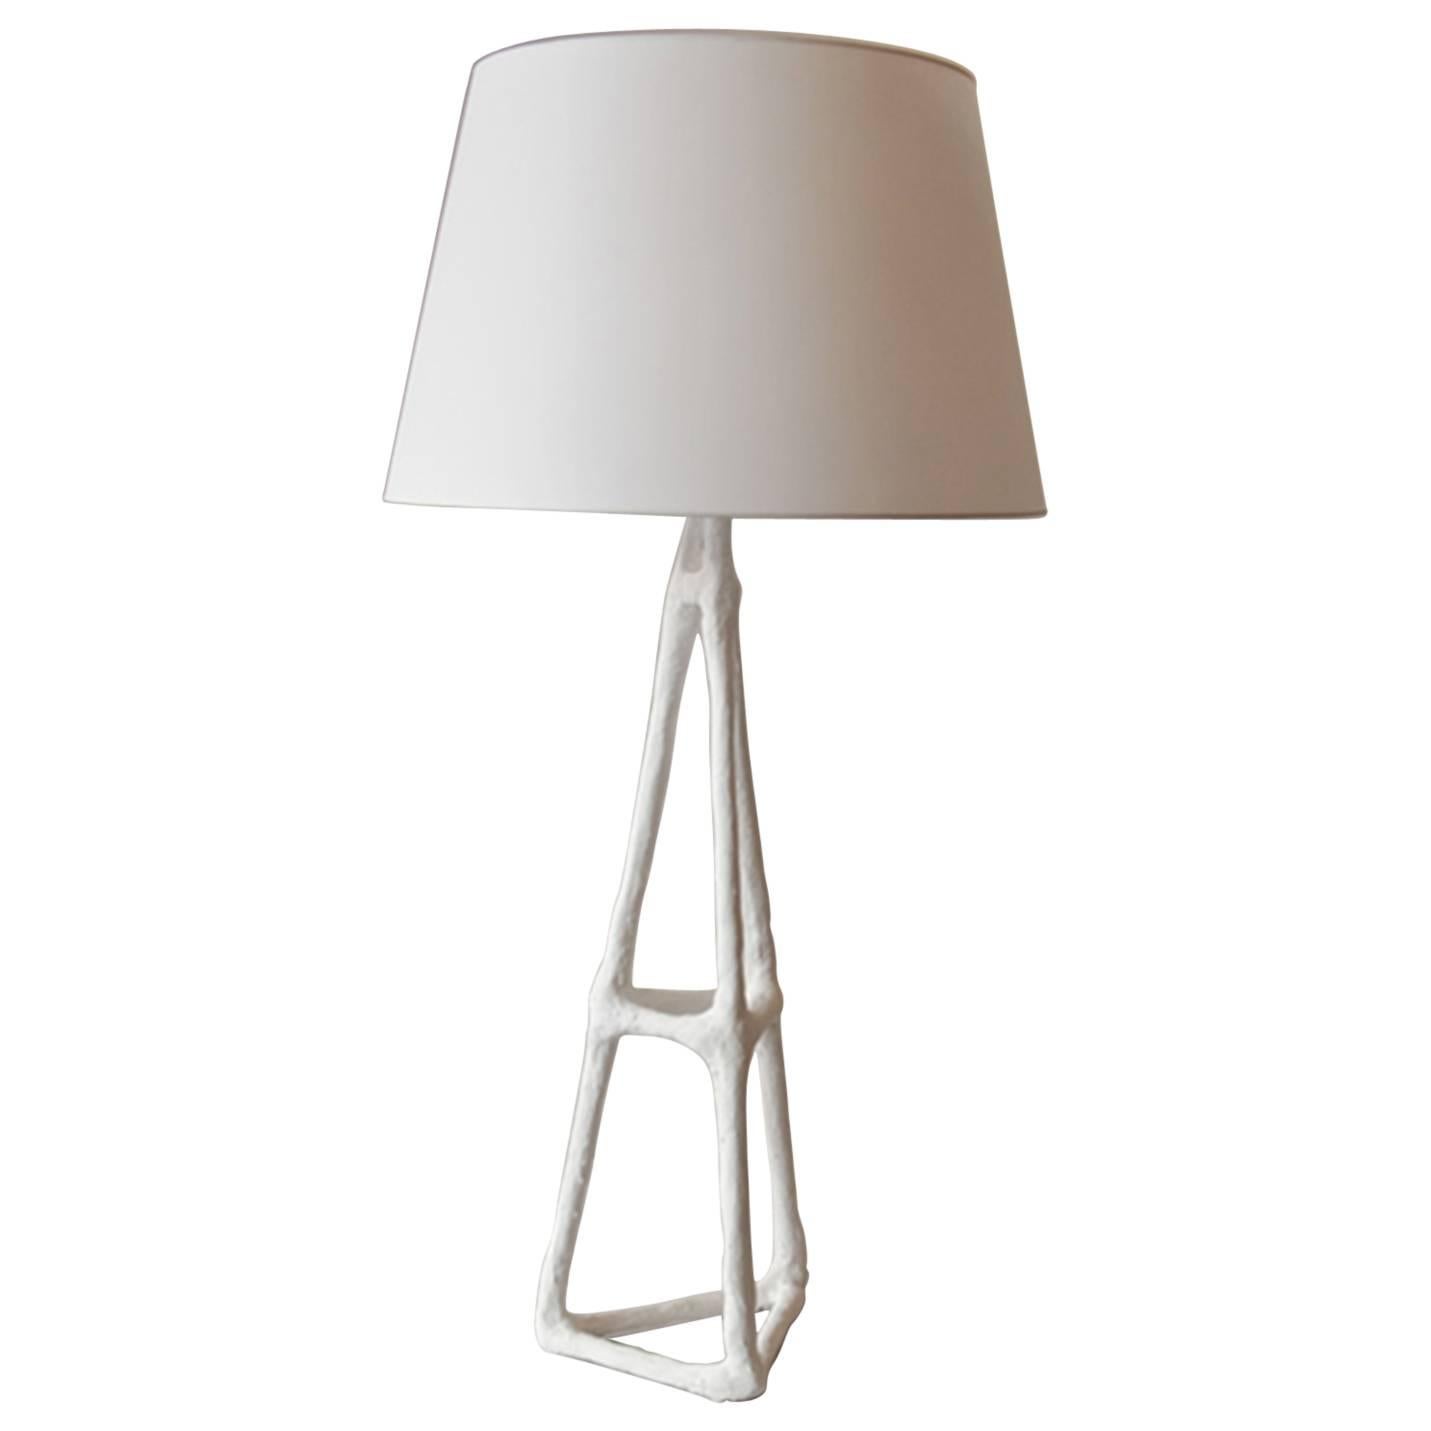 Artifex Handmade Plaster Solid Firm Coated Finish Table Lamp For Sale